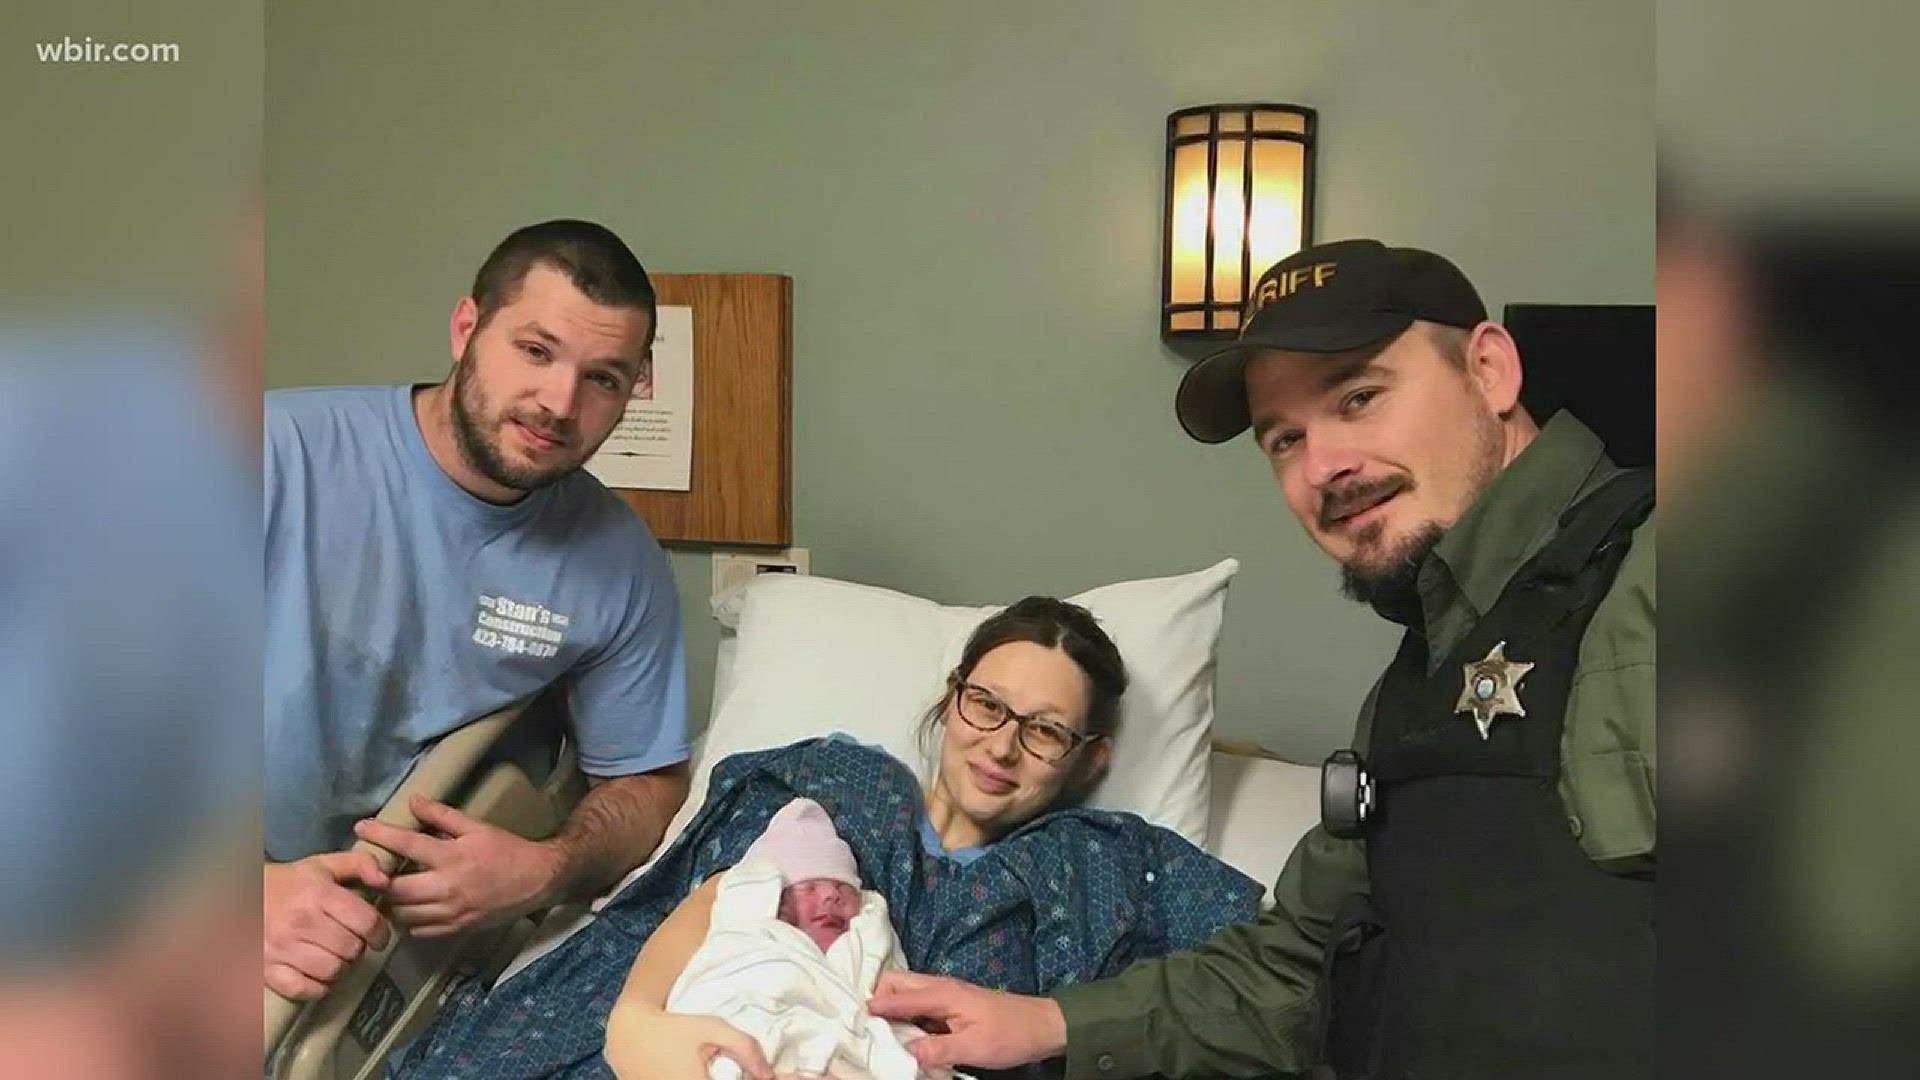 It was an unexpected Christmas gift a Campbell County family received a little early--a baby boy.